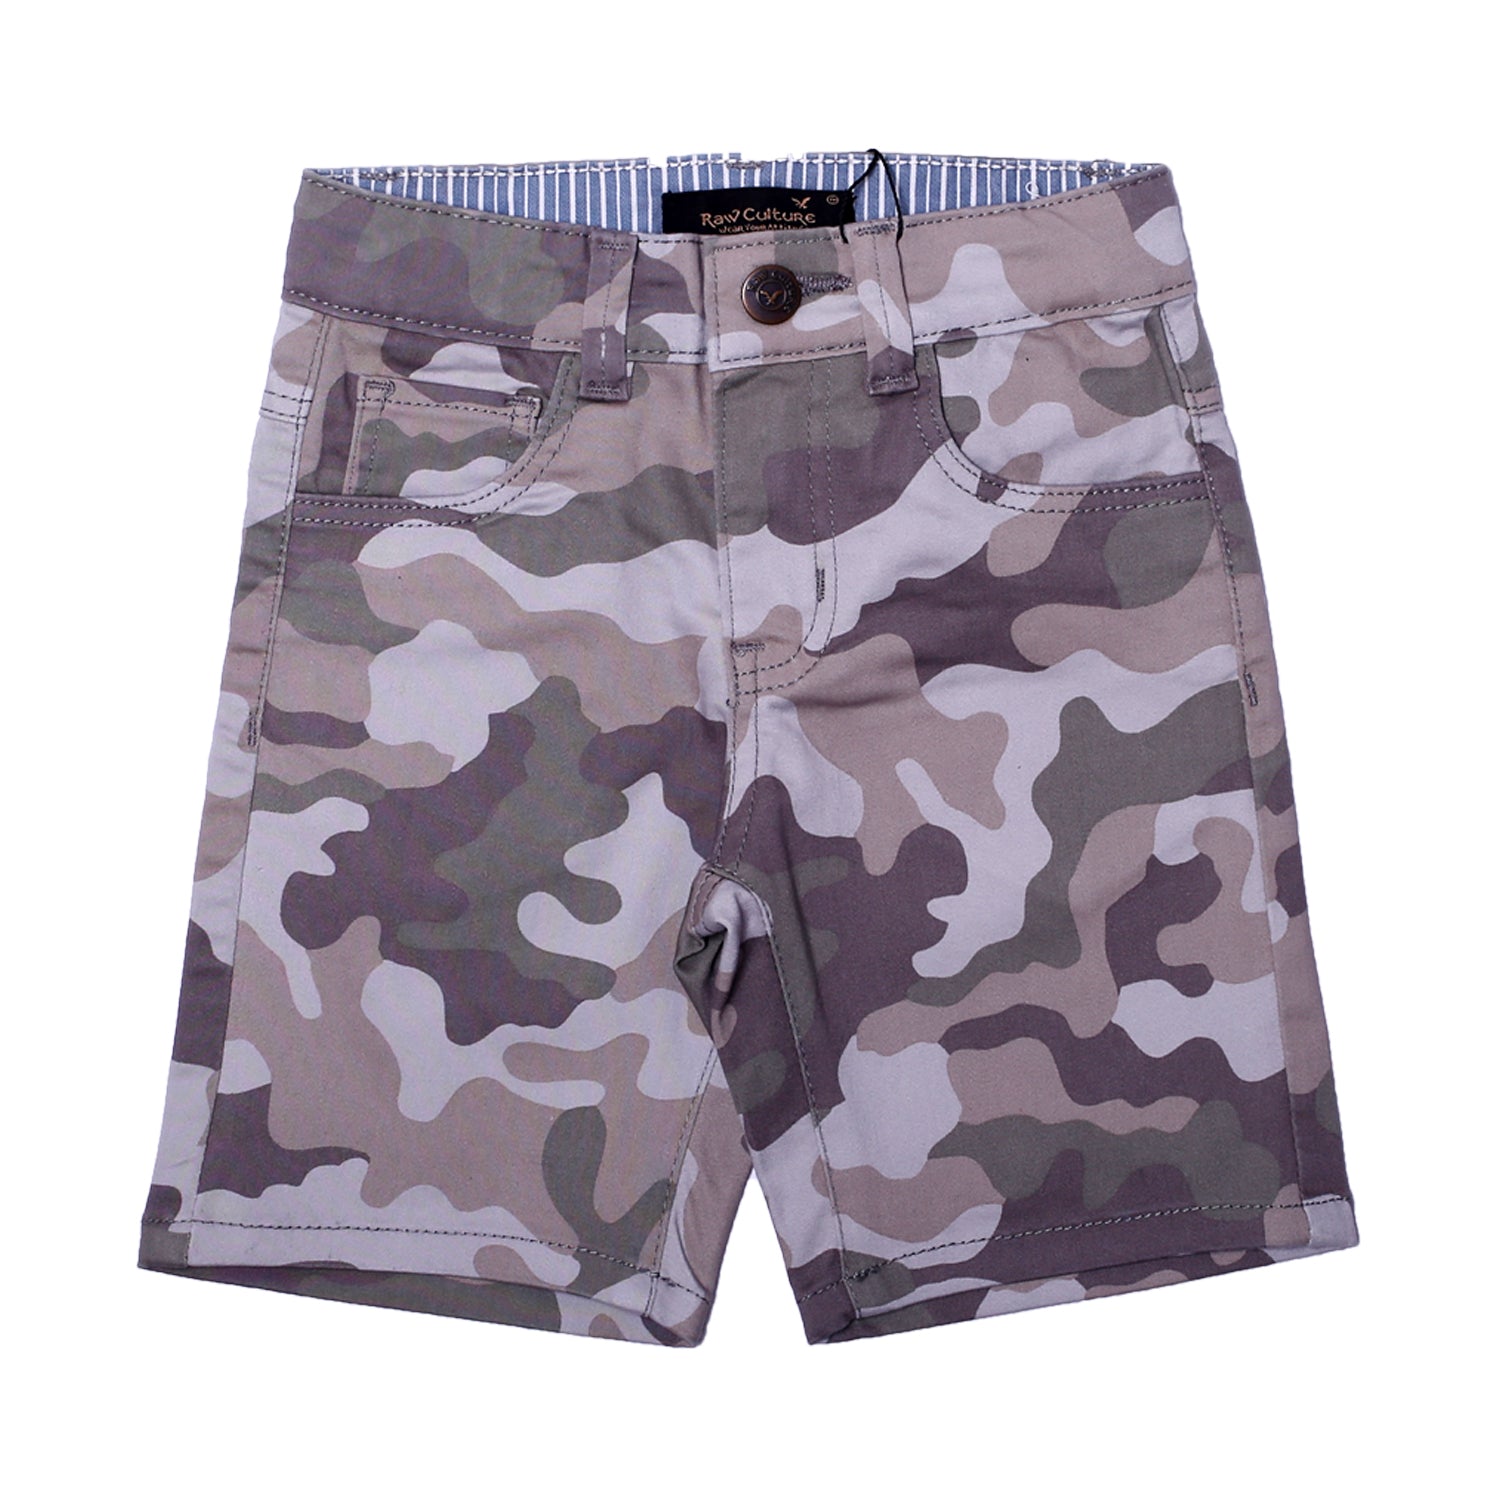 NEW GREY COTTON CAMOUFLAGE PRINTED SHORTS 15